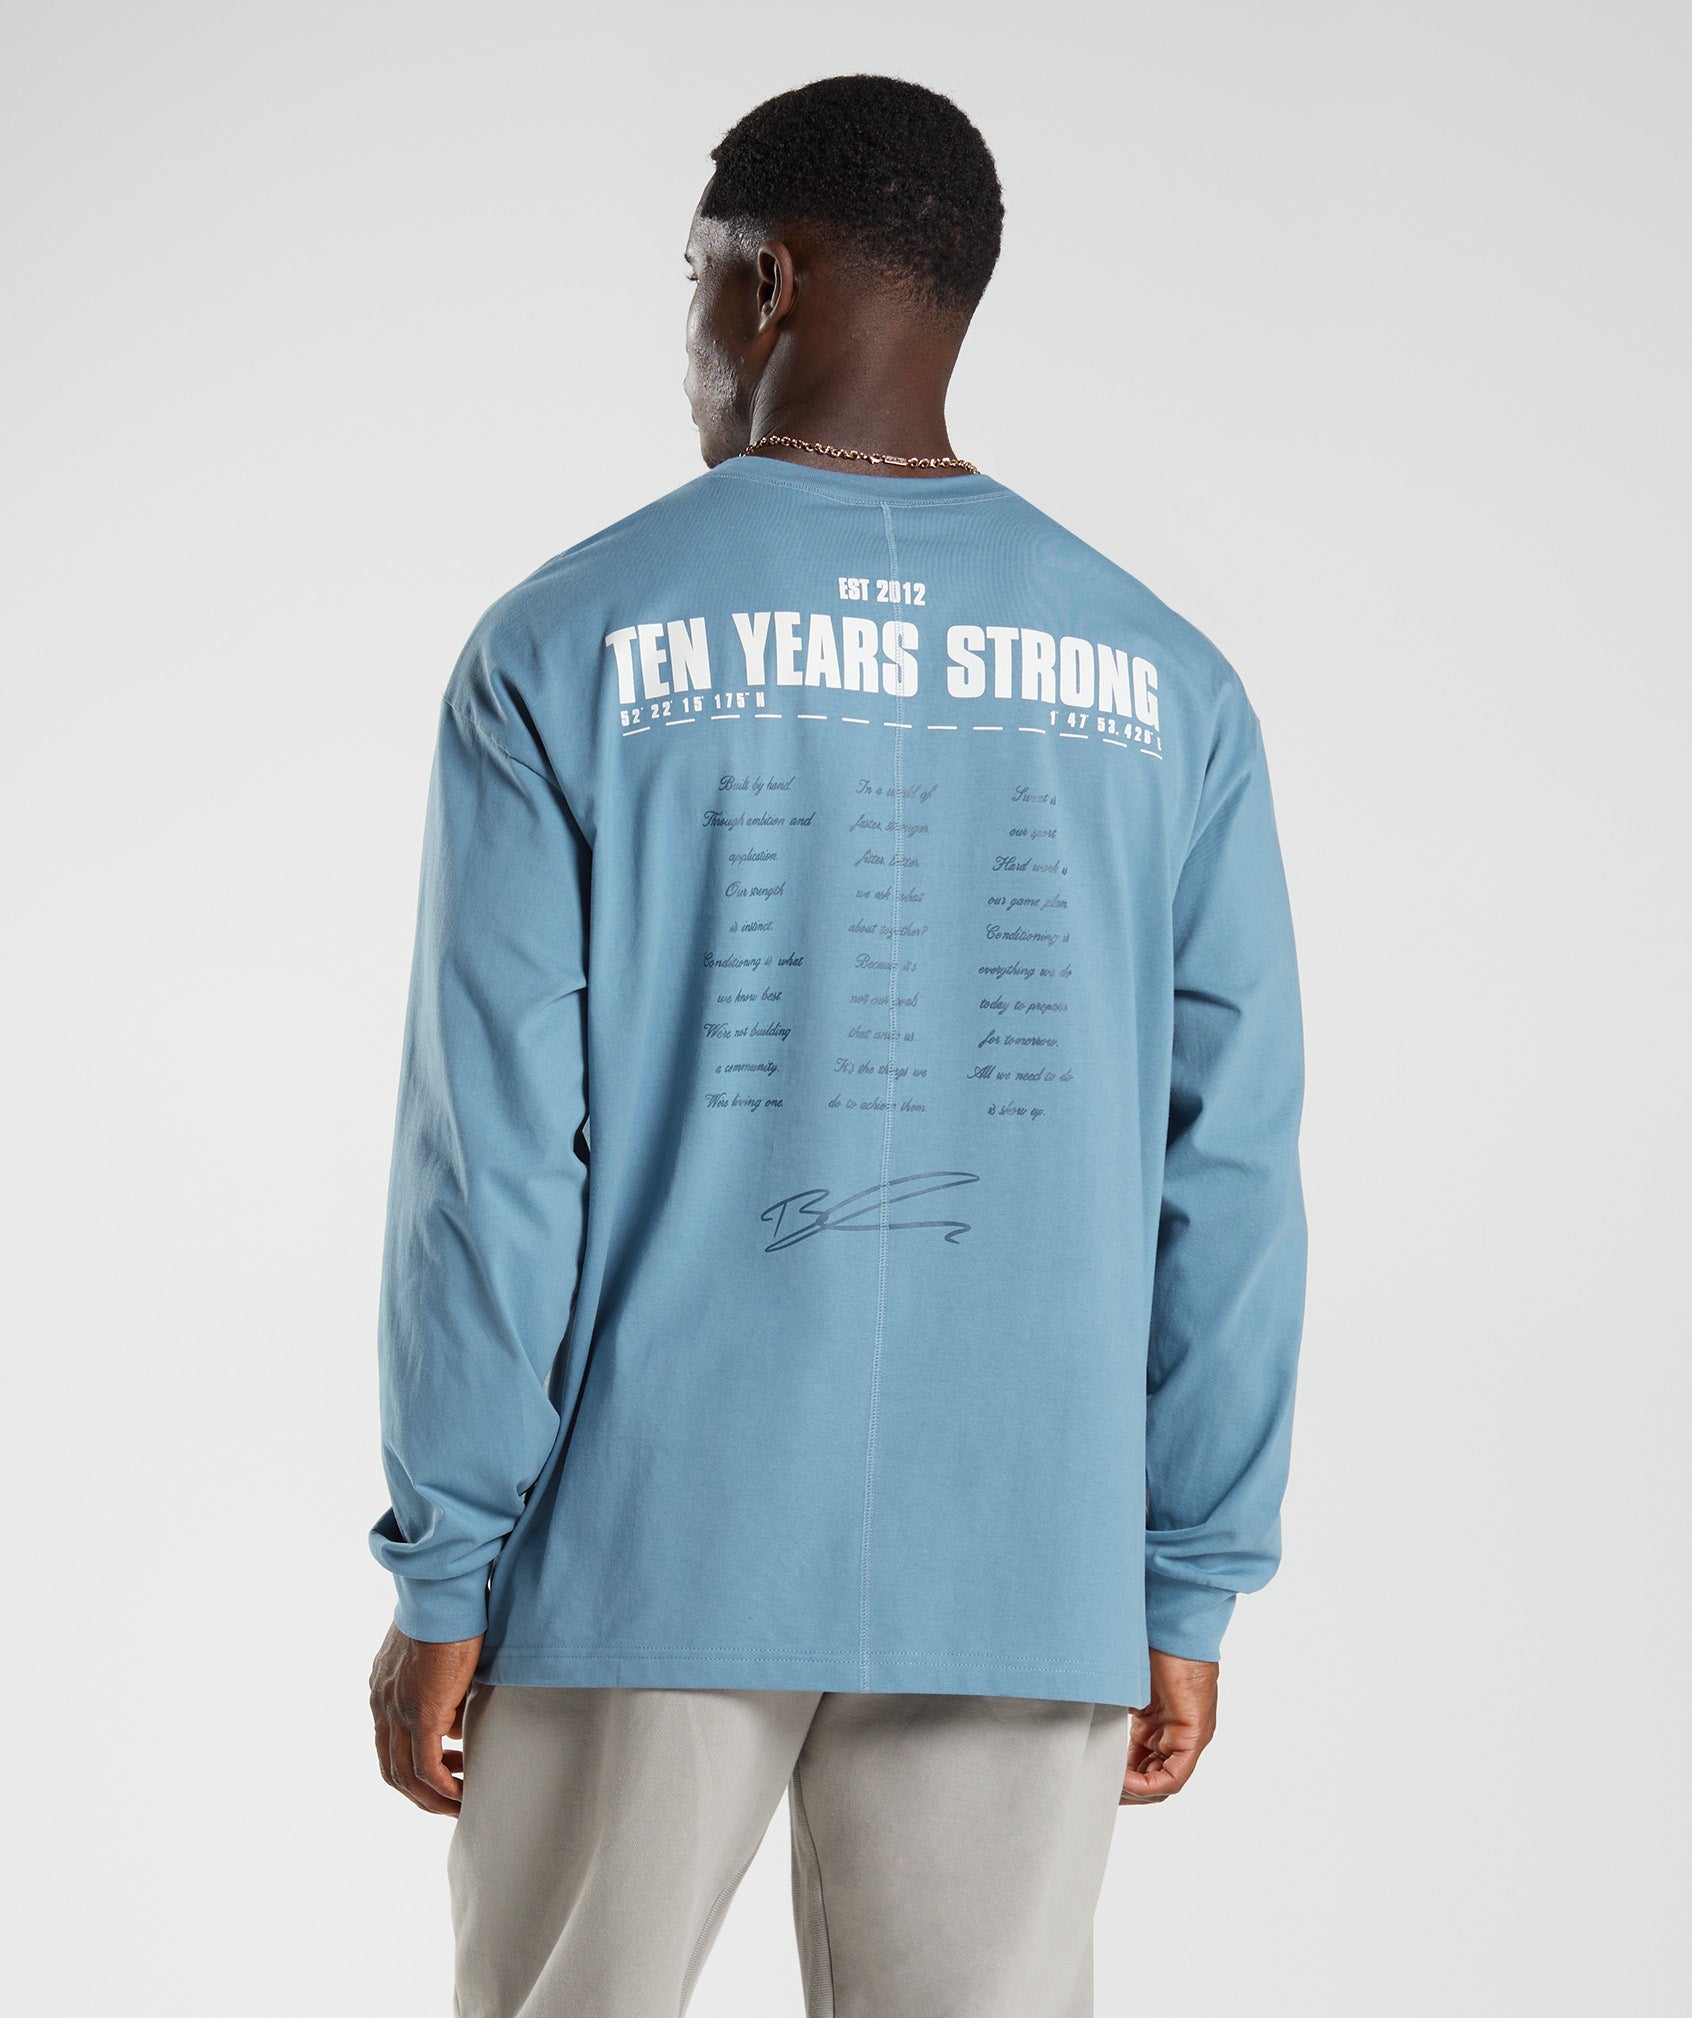 GS10 Year Oversized Long Sleeve T-Shirt in Denim Blue - view 1